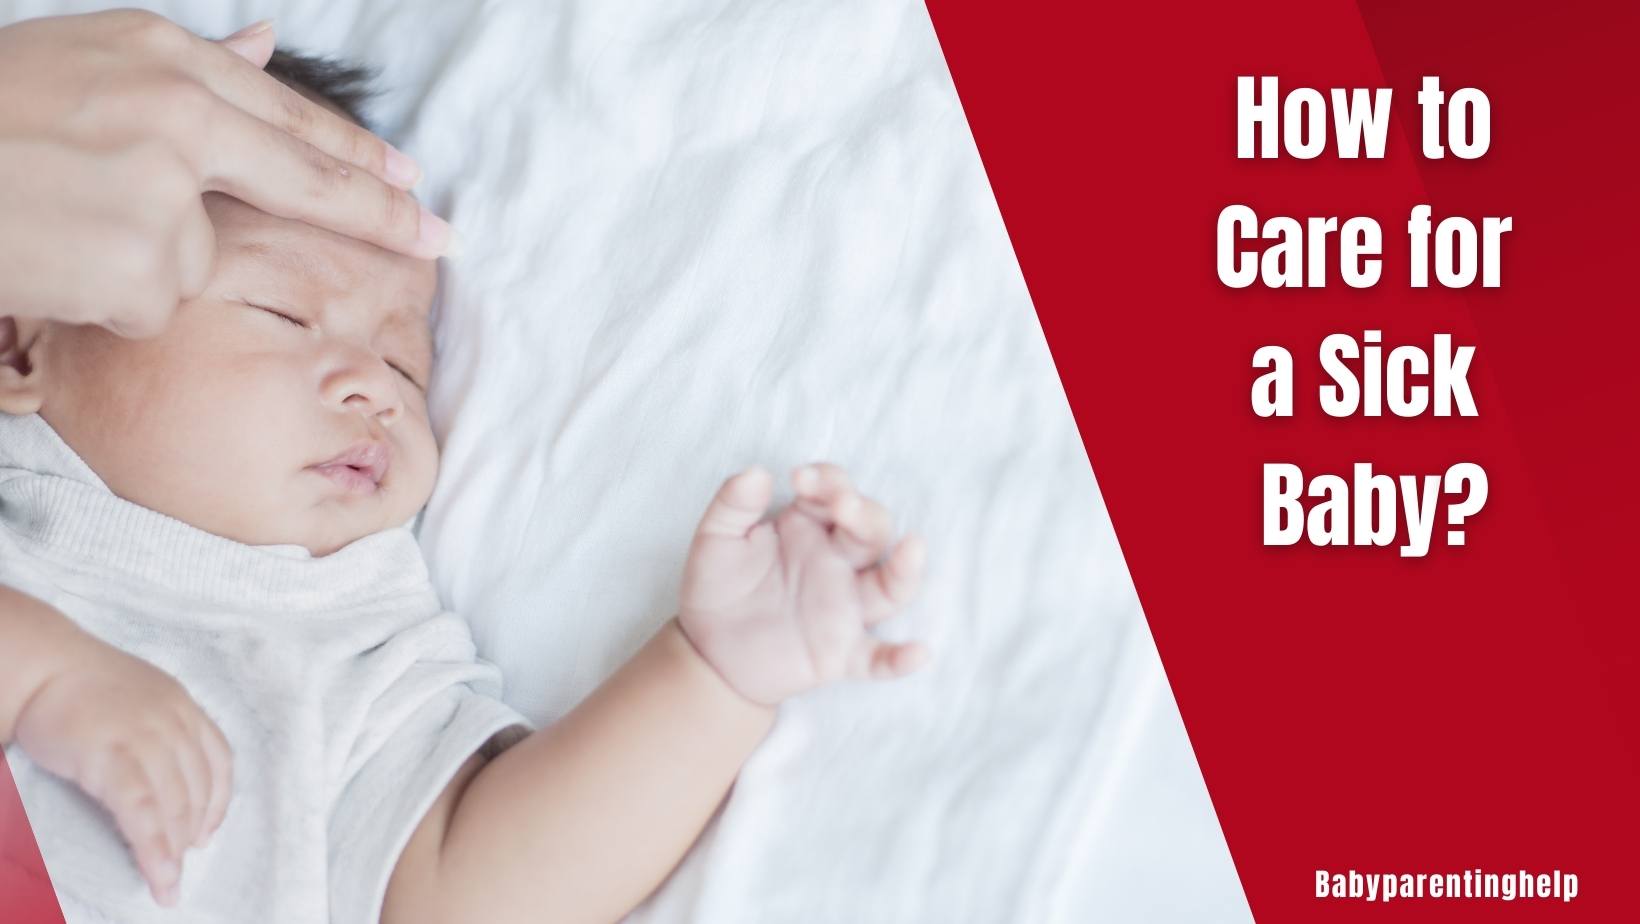 How to Care for a Sick Baby